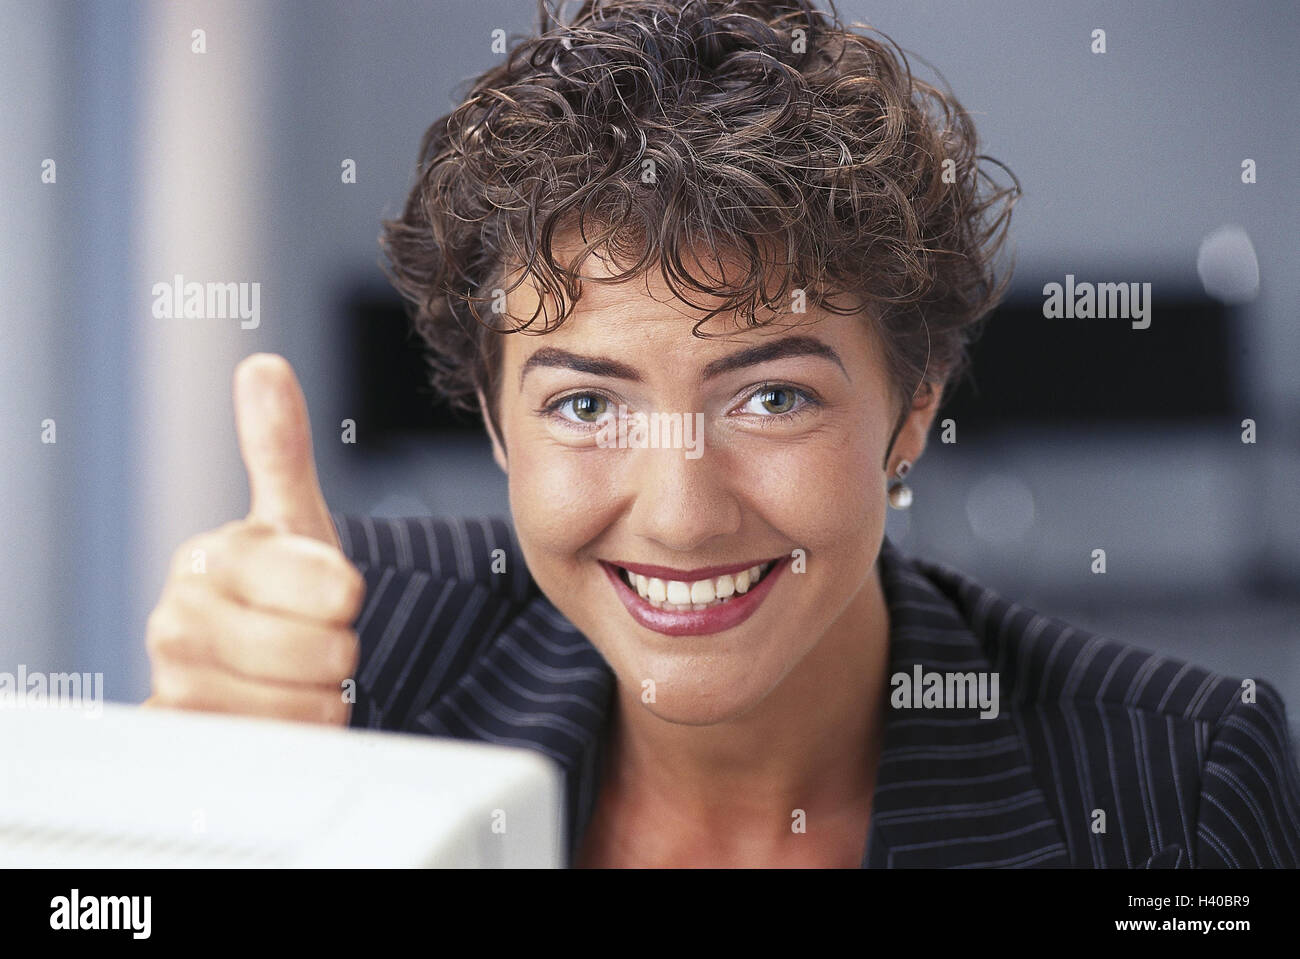 Woman, computer, gesture, pollex, high, joy, detail, office workers, office, computer, manager, show, indicate, sign language, O.K., body language, success, victory, triumph, positively, happy, inside Stock Photo